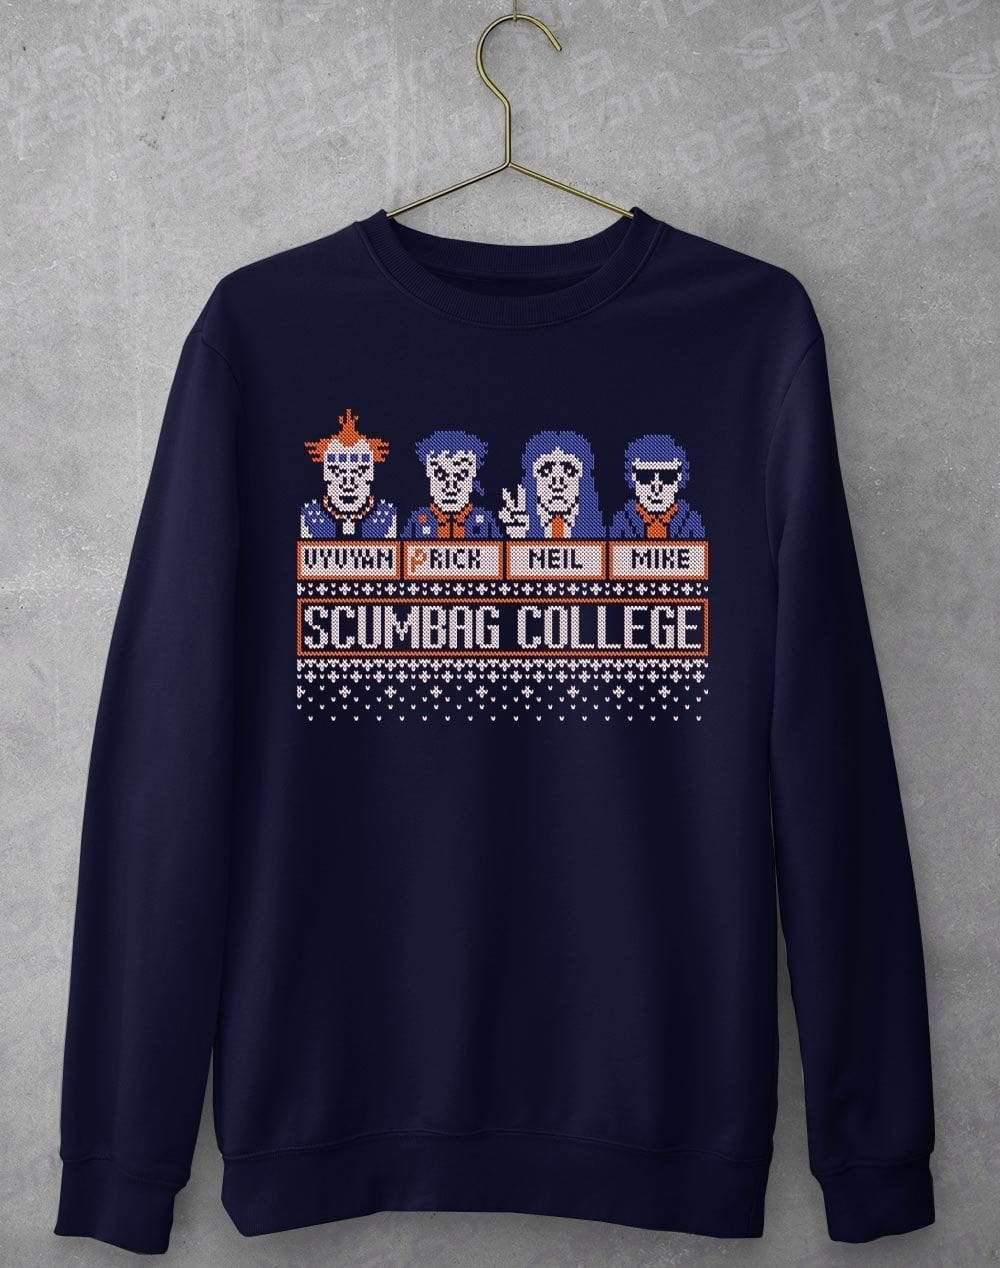 Scumbag College Festive Knitted-Look Sweatshirt XS / Oxford Navy  - Off World Tees